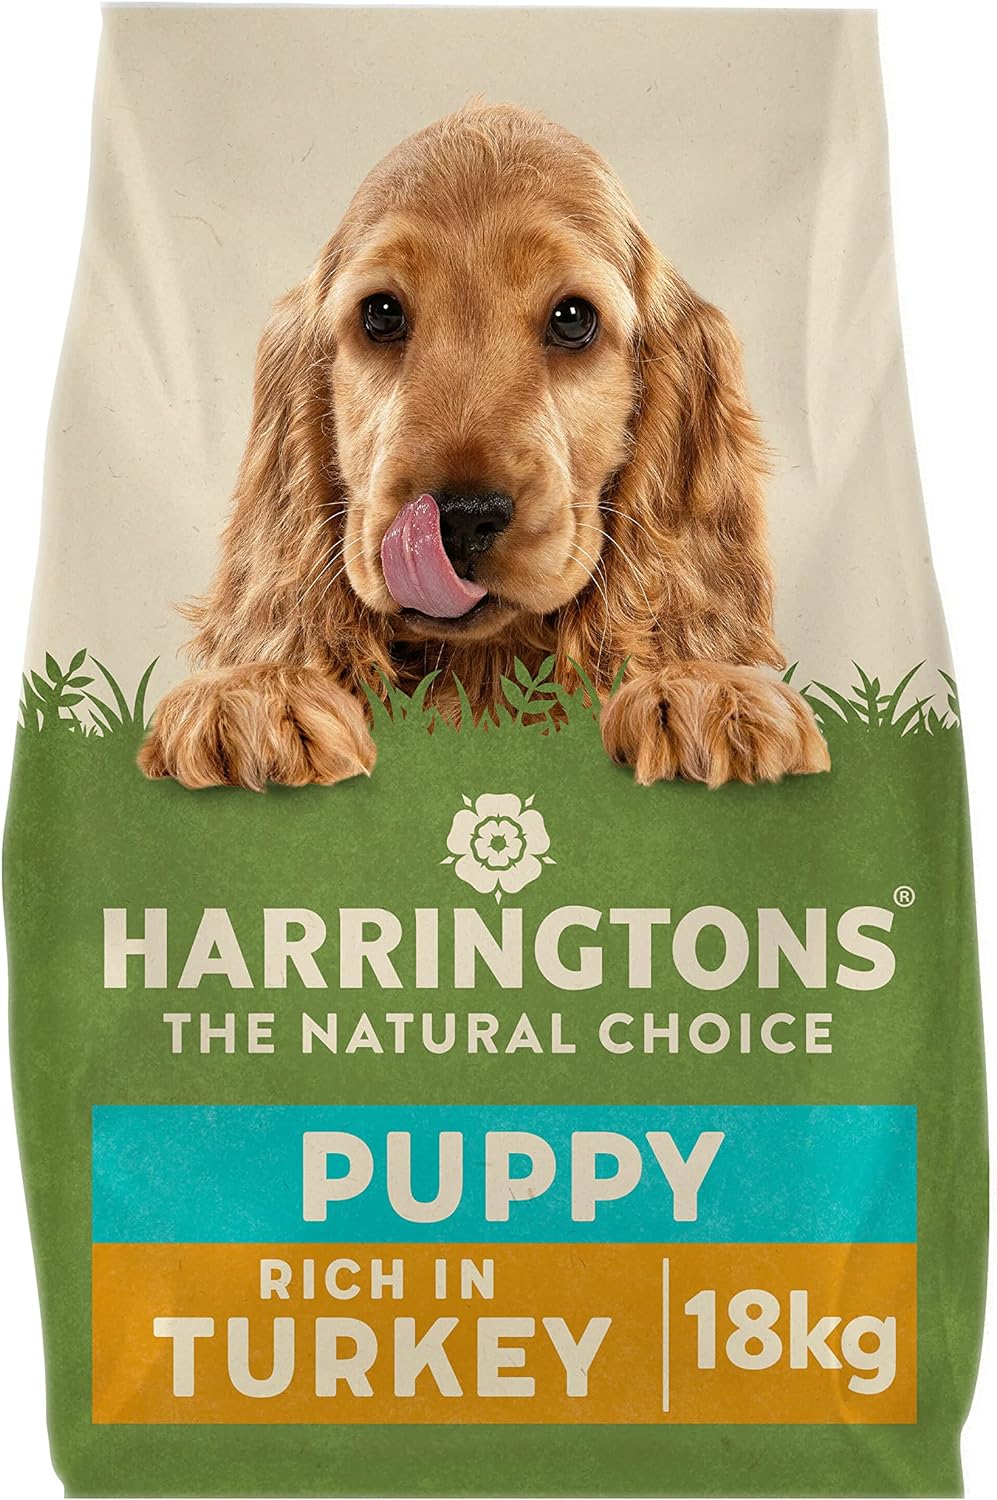 Harringtons Complete Puppy Dry Dog Food Turkey & Rice 18kg - Made with All Natural Ingredients?HARRPUP-18